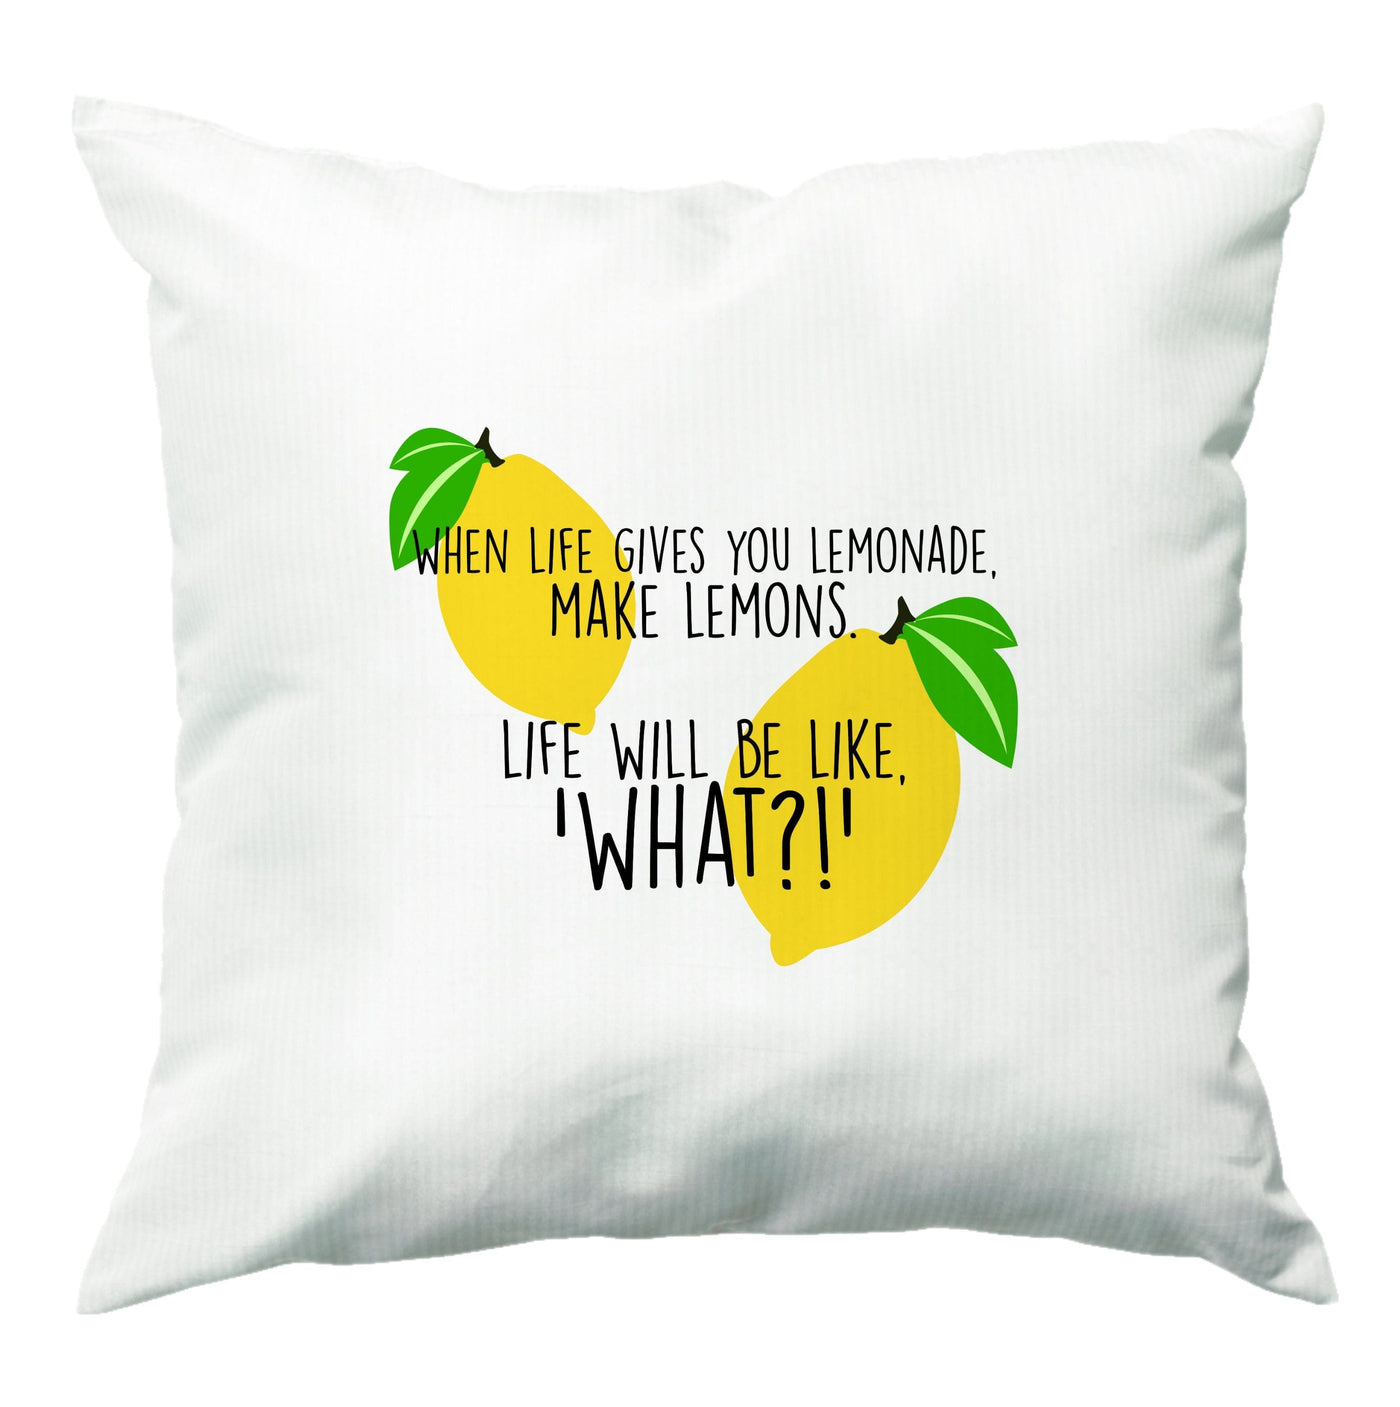 When Life Gives You Lemonade - TV Quotes Cushion